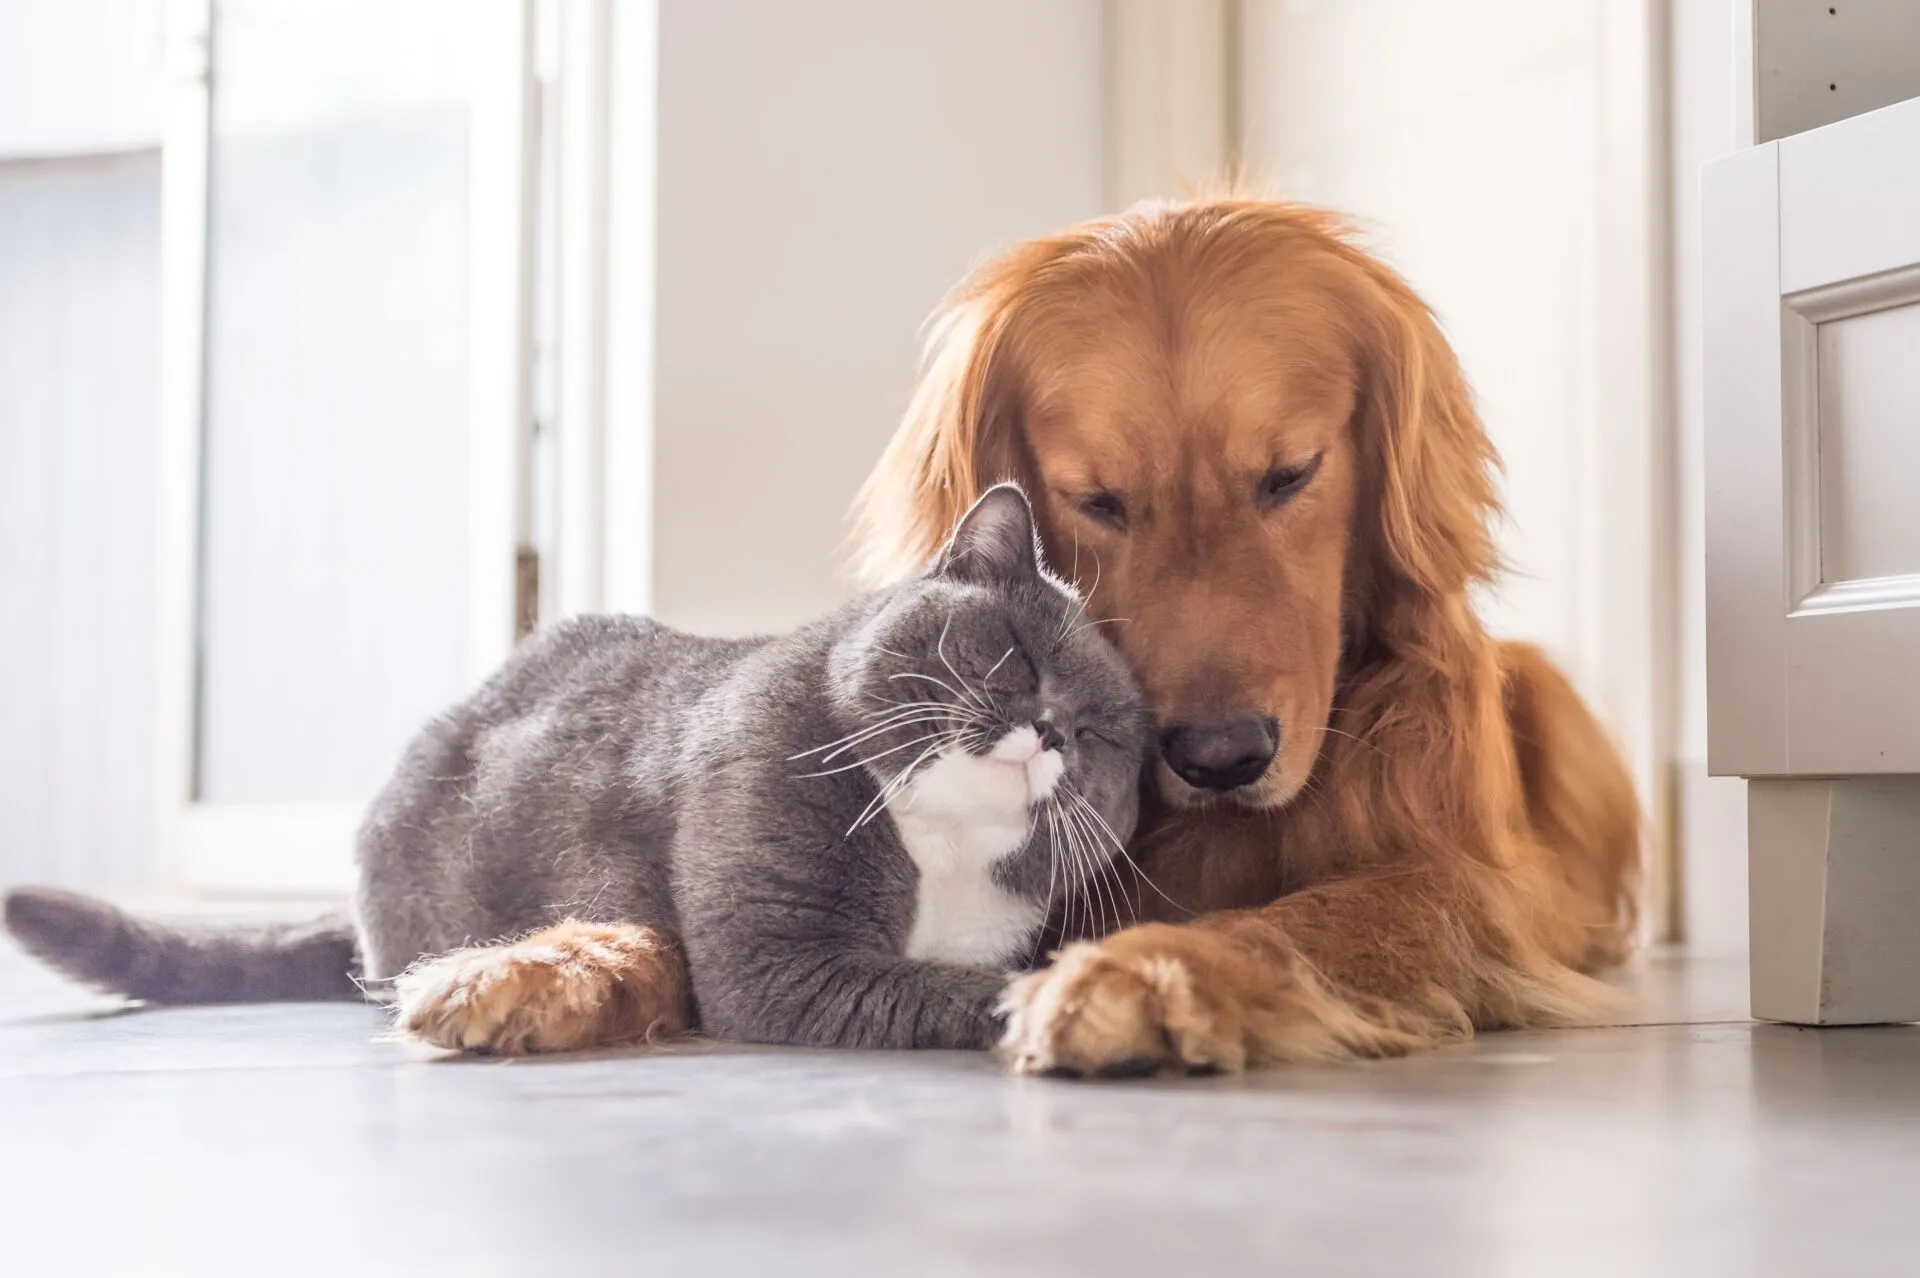 Cat with grey and white fur cuddling with a brown dog